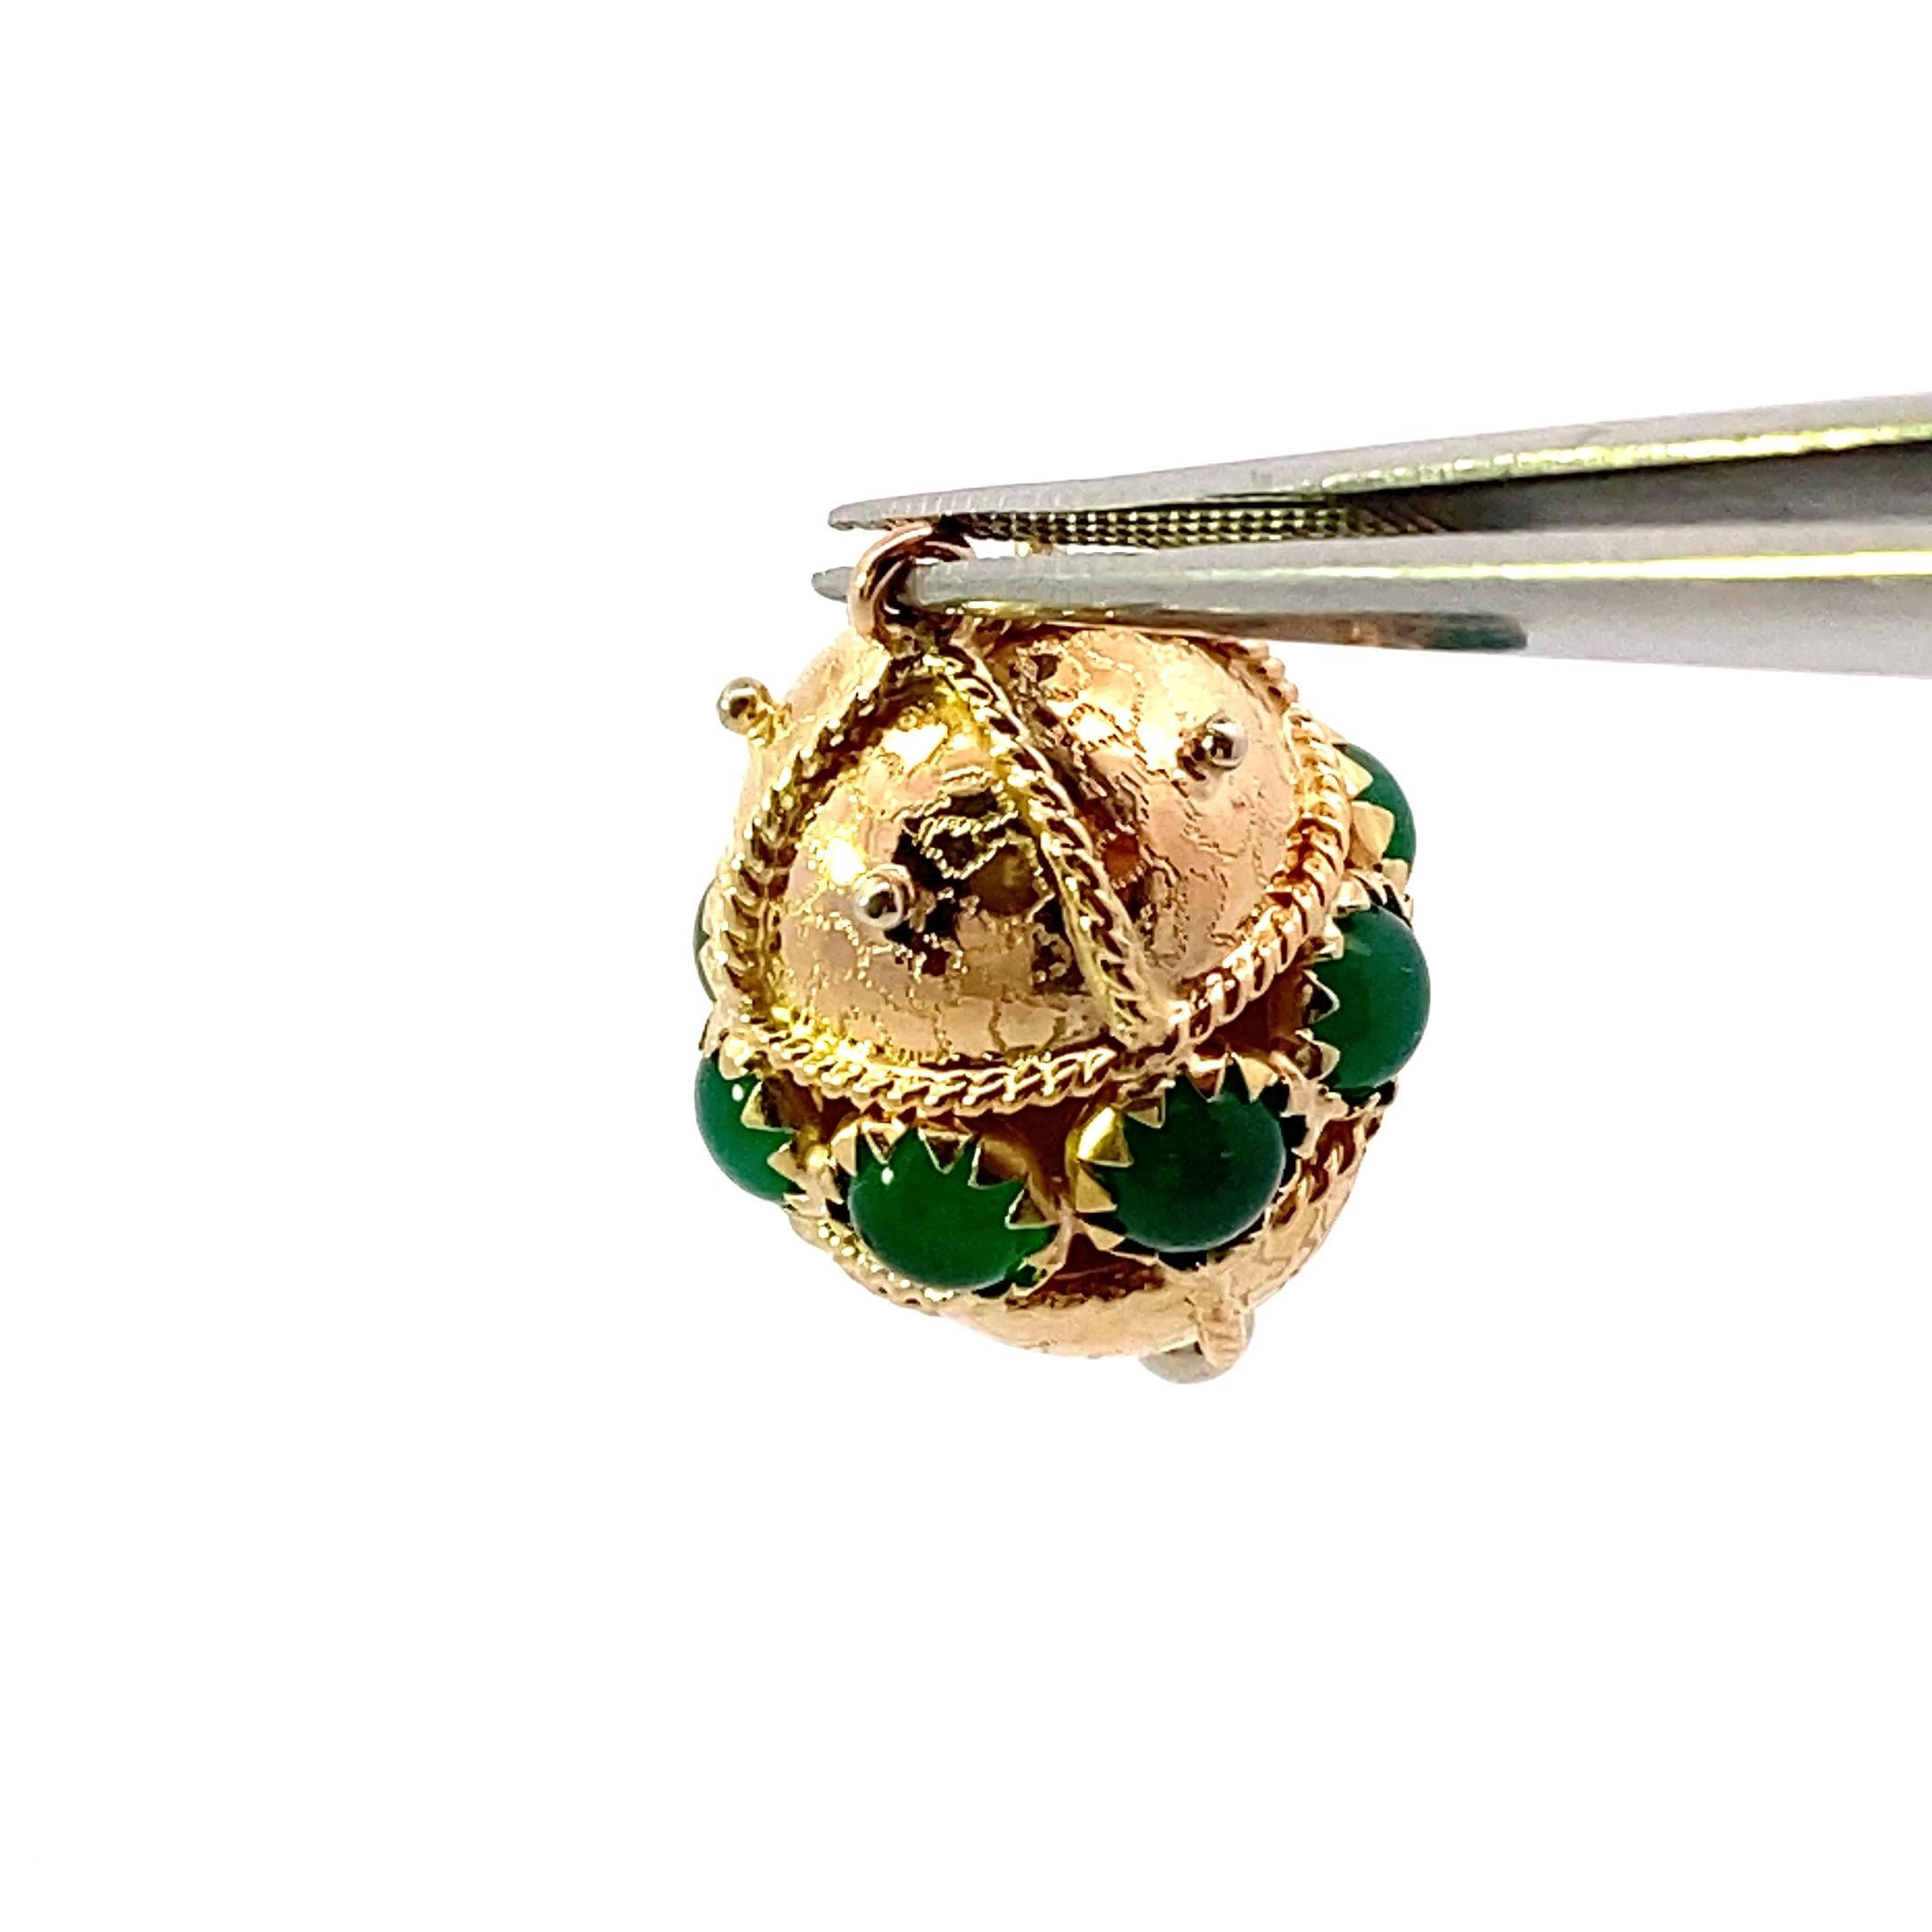 18k yellow gold 8=4.0 carat total weight cabochon emerald egg-shaped charm pendant. Charm measures 30x20mm. 4.4Dwt.